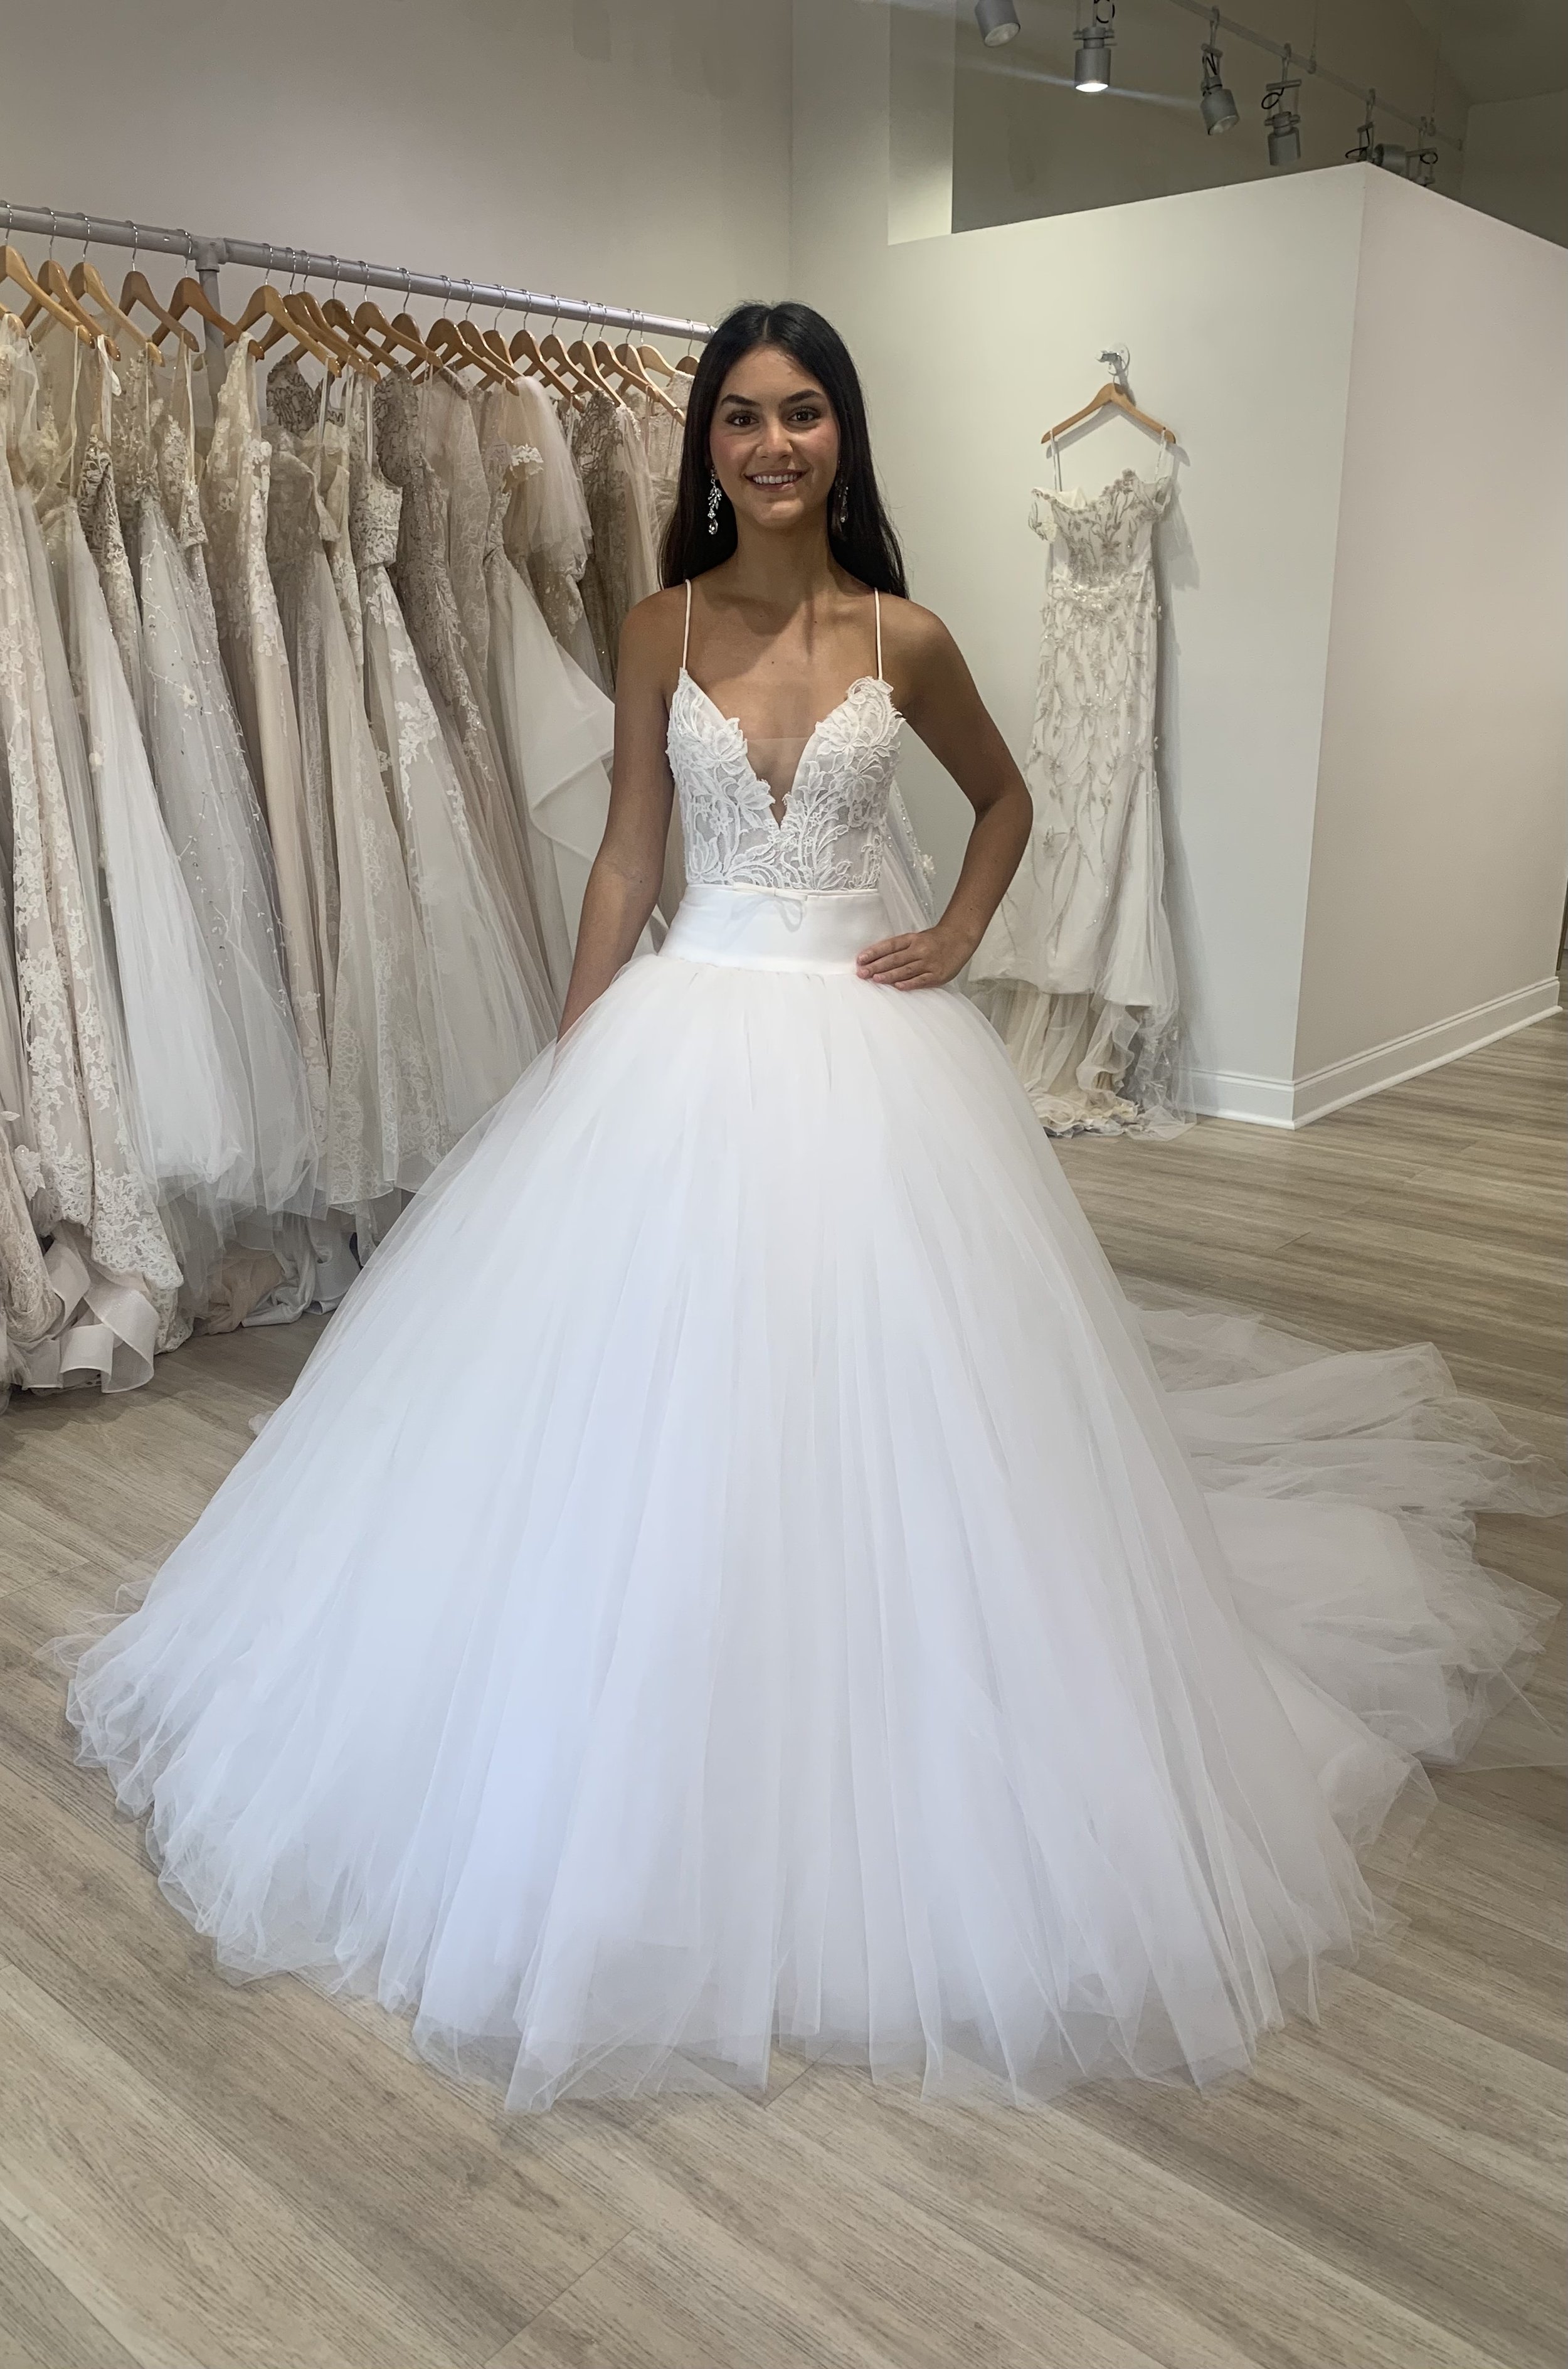 Princess Wedding Dress 2021 Ball Gown Sweetheart Neck Long Sleeves backless  Lace Tulle Bridal Dresses With Court Train — Bridelily